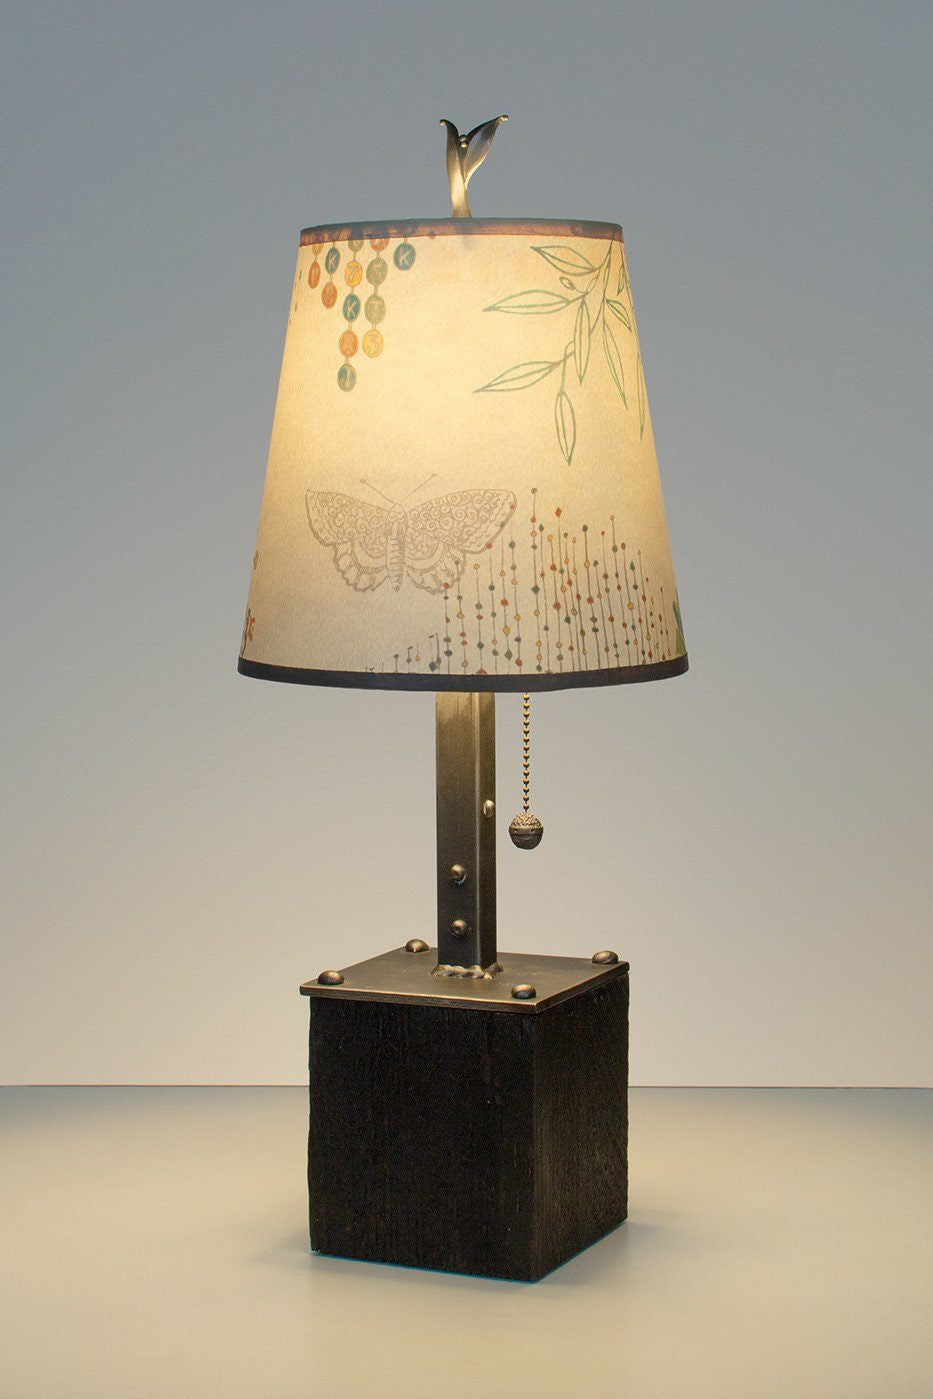 Janna Ugone &amp; Co Table Lamps Steel Table Lamp on Reclaimed Wood with Small Drum Shade in Ecru Journey